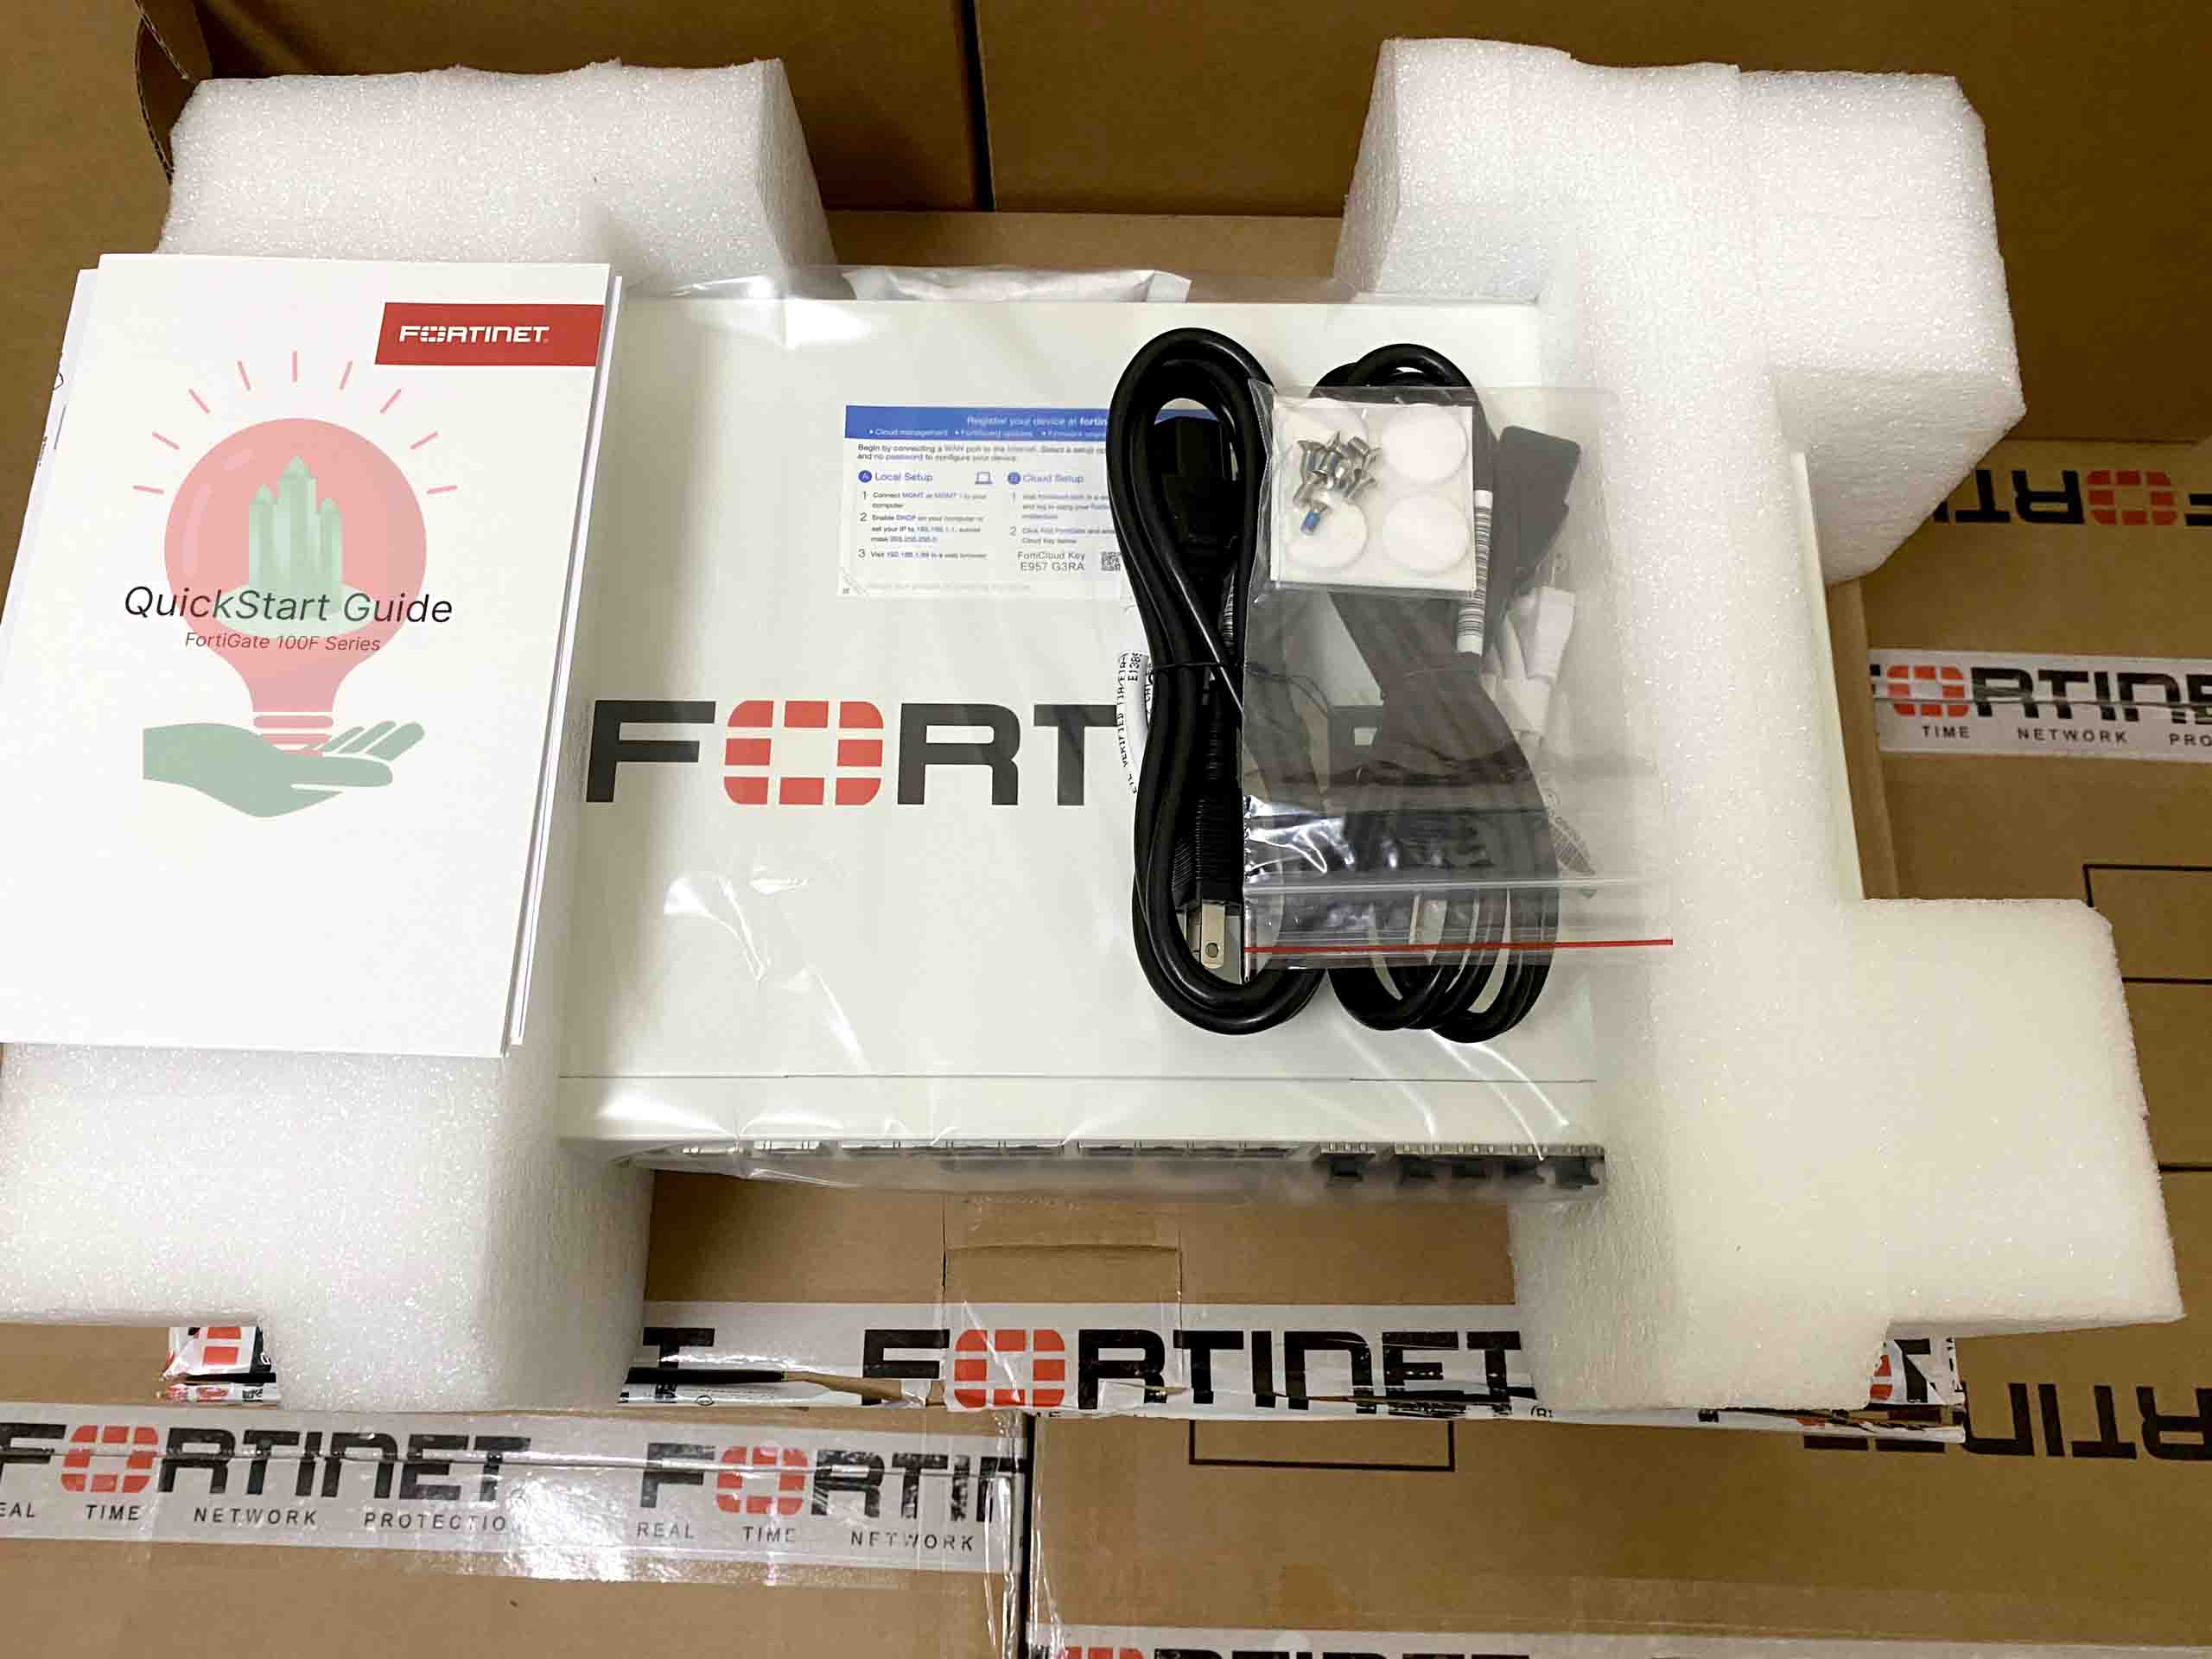 Fortinet FortiGate FG-100F Security Appliance 22 x GE RJ45 Ports, 4 SFP Max 150 User